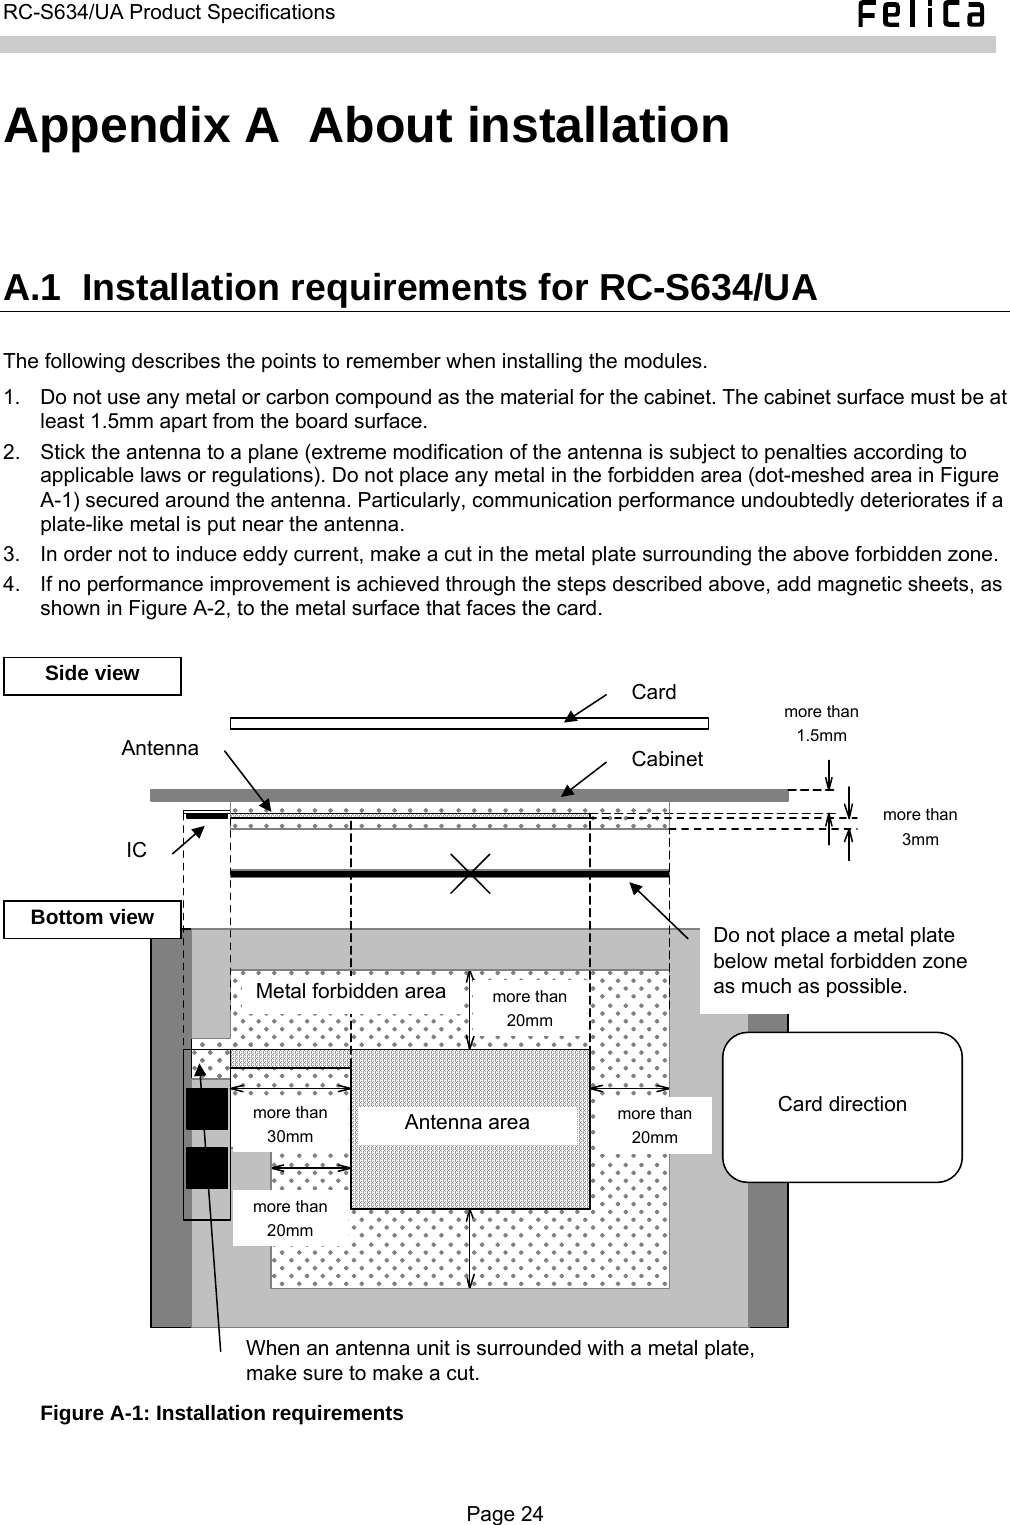   RC-S634/UA Product Specifications  Appendix A  About installation A.1  Installation requirements for RC-S634/UA The following describes the points to remember when installing the modules. 1.  Do not use any metal or carbon compound as the material for the cabinet. The cabinet surface must be at least 1.5mm apart from the board surface. 2.  Stick the antenna to a plane (extreme modification of the antenna is subject to penalties according to applicable laws or regulations). Do not place any metal in the forbidden area (dot-meshed area in Figure A-1) secured around the antenna. Particularly, communication performance undoubtedly deteriorates if a plate-like metal is put near the antenna. 3.  In order not to induce eddy current, make a cut in the metal plate surrounding the above forbidden zone. 4.  If no performance improvement is achieved through the steps described above, add magnetic sheets, as shown in Figure A-2, to the metal surface that faces the card.  Side view Bottom view Metal forbidden area more than 20mm more than 20mm more than 20mm more than 1.5mm Antenna area  Card direction Card Do not place a metal plate below metal forbidden zoneas much as possible. 3mm more than IC more than 30mm When an antenna unit is surrounded with a metal plate,make sure to make a cut. Cabinet Antenna  Figure A-1: Installation requirements  Page 24  